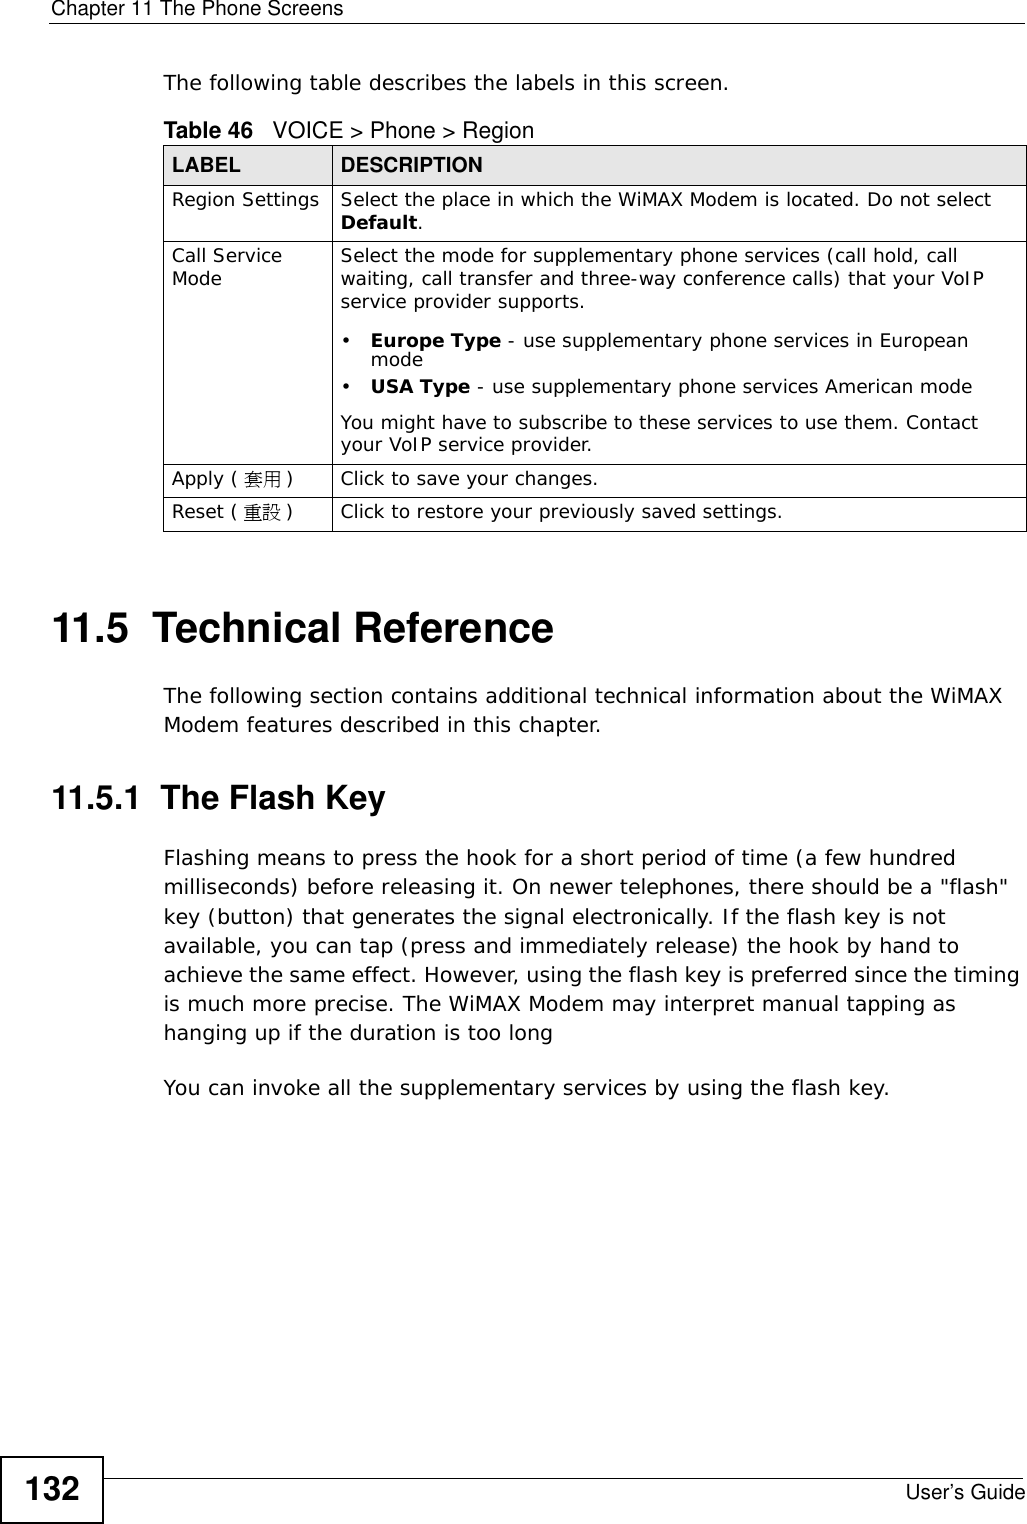 Chapter 11 The Phone ScreensUser’s Guide132The following table describes the labels in this screen.11.5  Technical ReferenceThe following section contains additional technical information about the WiMAX Modem features described in this chapter.11.5.1  The Flash KeyFlashing means to press the hook for a short period of time (a few hundred milliseconds) before releasing it. On newer telephones, there should be a &quot;flash&quot; key (button) that generates the signal electronically. If the flash key is not available, you can tap (press and immediately release) the hook by hand to achieve the same effect. However, using the flash key is preferred since the timing is much more precise. The WiMAX Modem may interpret manual tapping as hanging up if the duration is too longYou can invoke all the supplementary services by using the flash key. Table 46   VOICE &gt; Phone &gt; RegionLABEL DESCRIPTIONRegion Settings Select the place in which the WiMAX Modem is located. Do not select Default.Call Service Mode Select the mode for supplementary phone services (call hold, call waiting, call transfer and three-way conference calls) that your VoIP service provider supports.•Europe Type - use supplementary phone services in European mode•USA Type - use supplementary phone services American modeYou might have to subscribe to these services to use them. Contact your VoIP service provider.Apply ( 套用 )Click to save your changes.Reset ( 重設 )Click to restore your previously saved settings.